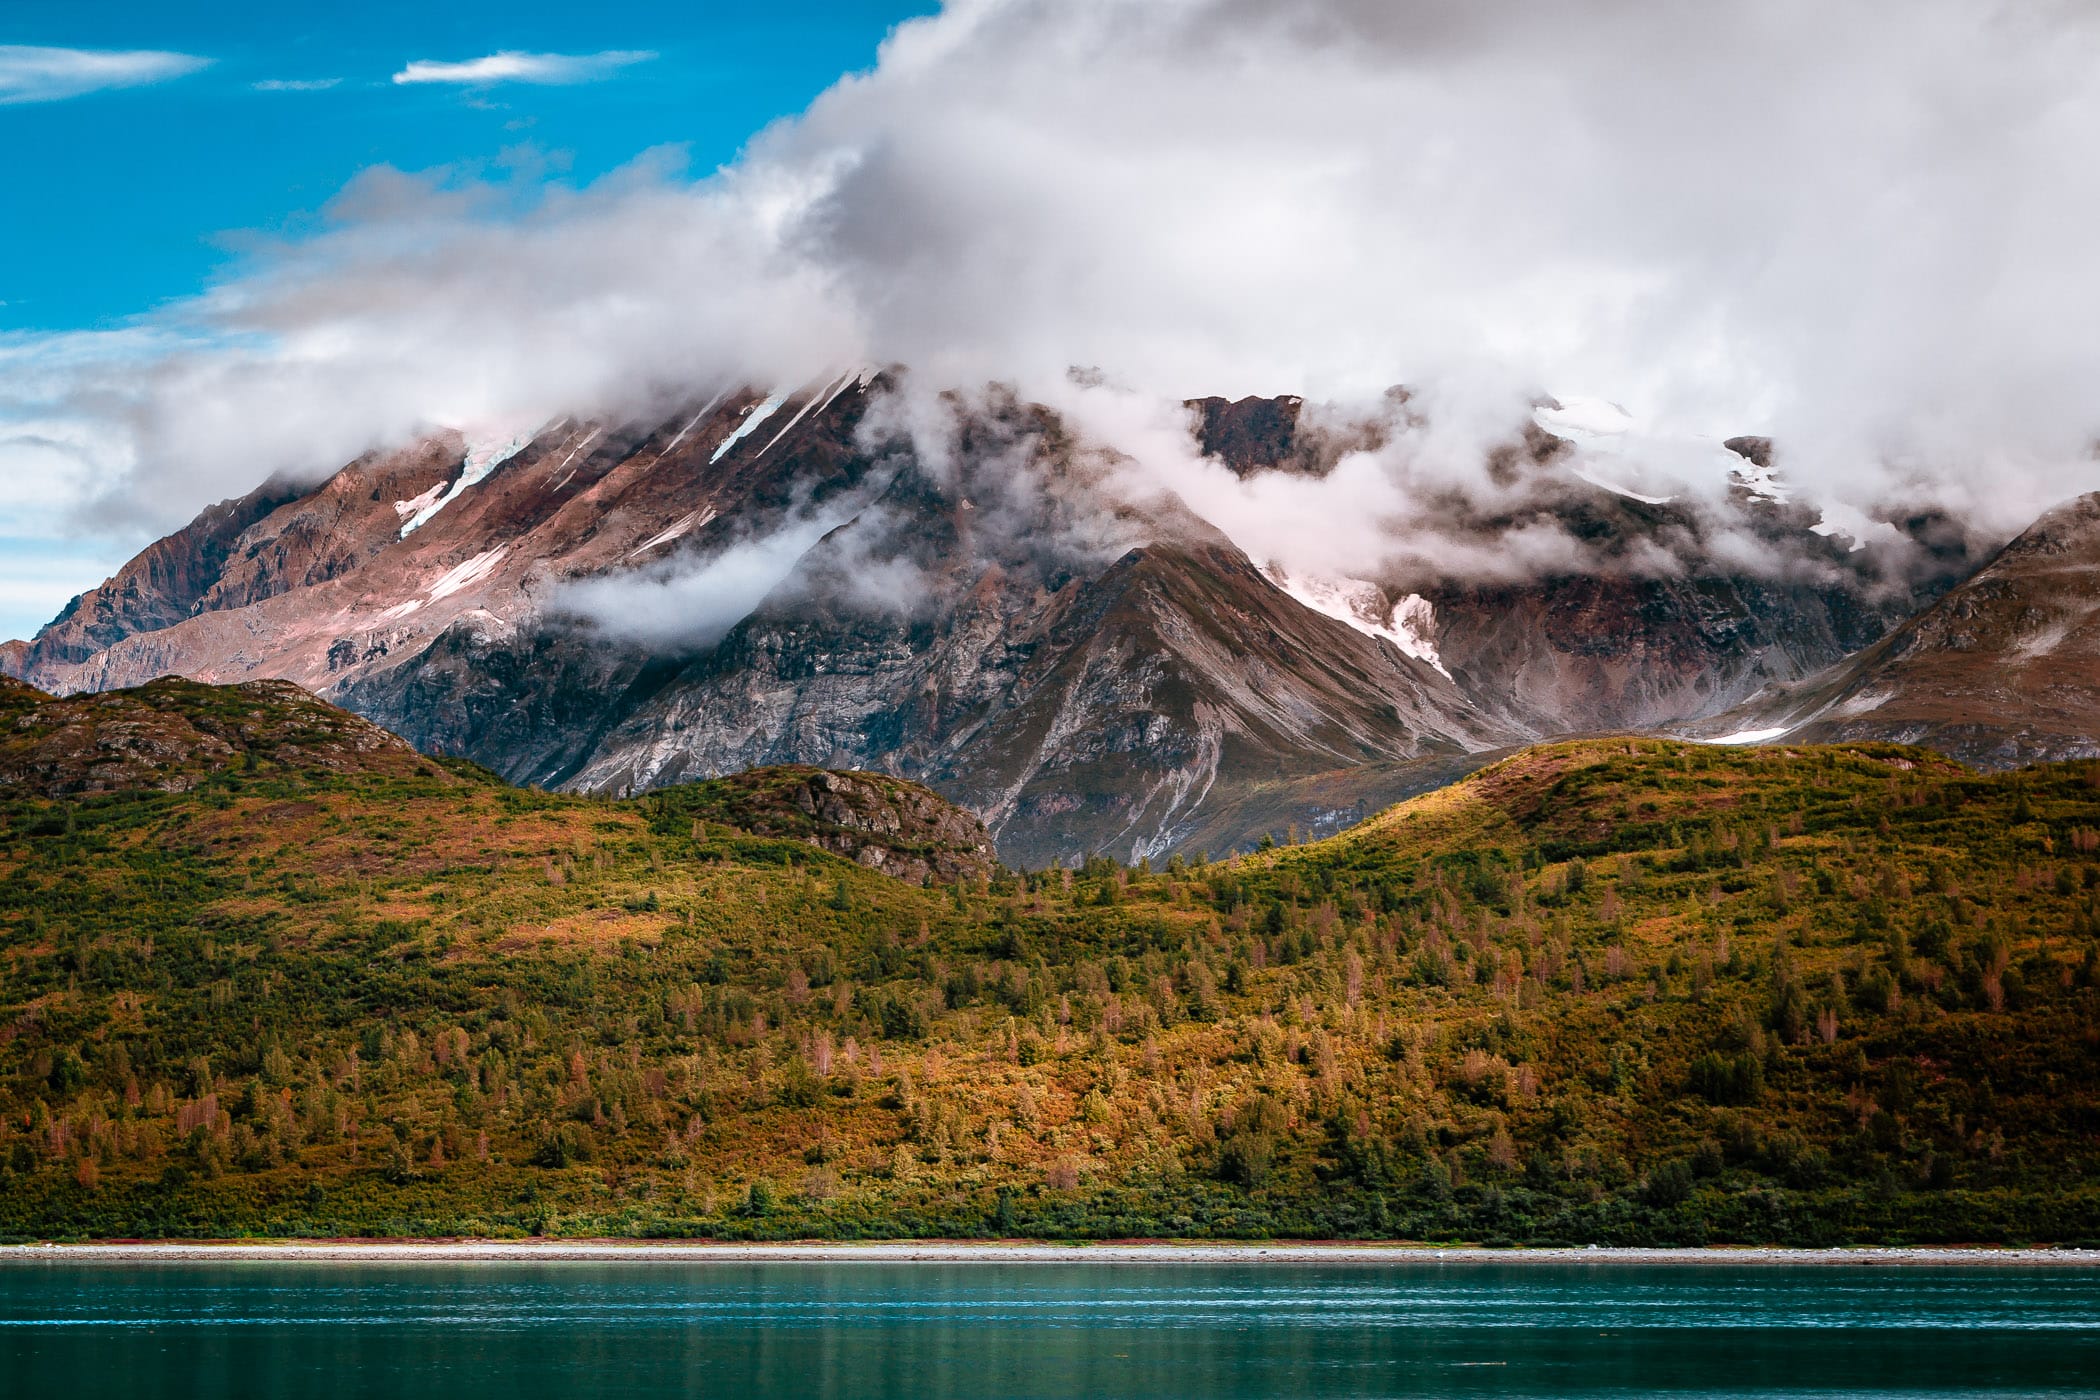 A mountain rises into the clouds at Glacier Bay National Park, Alaska.